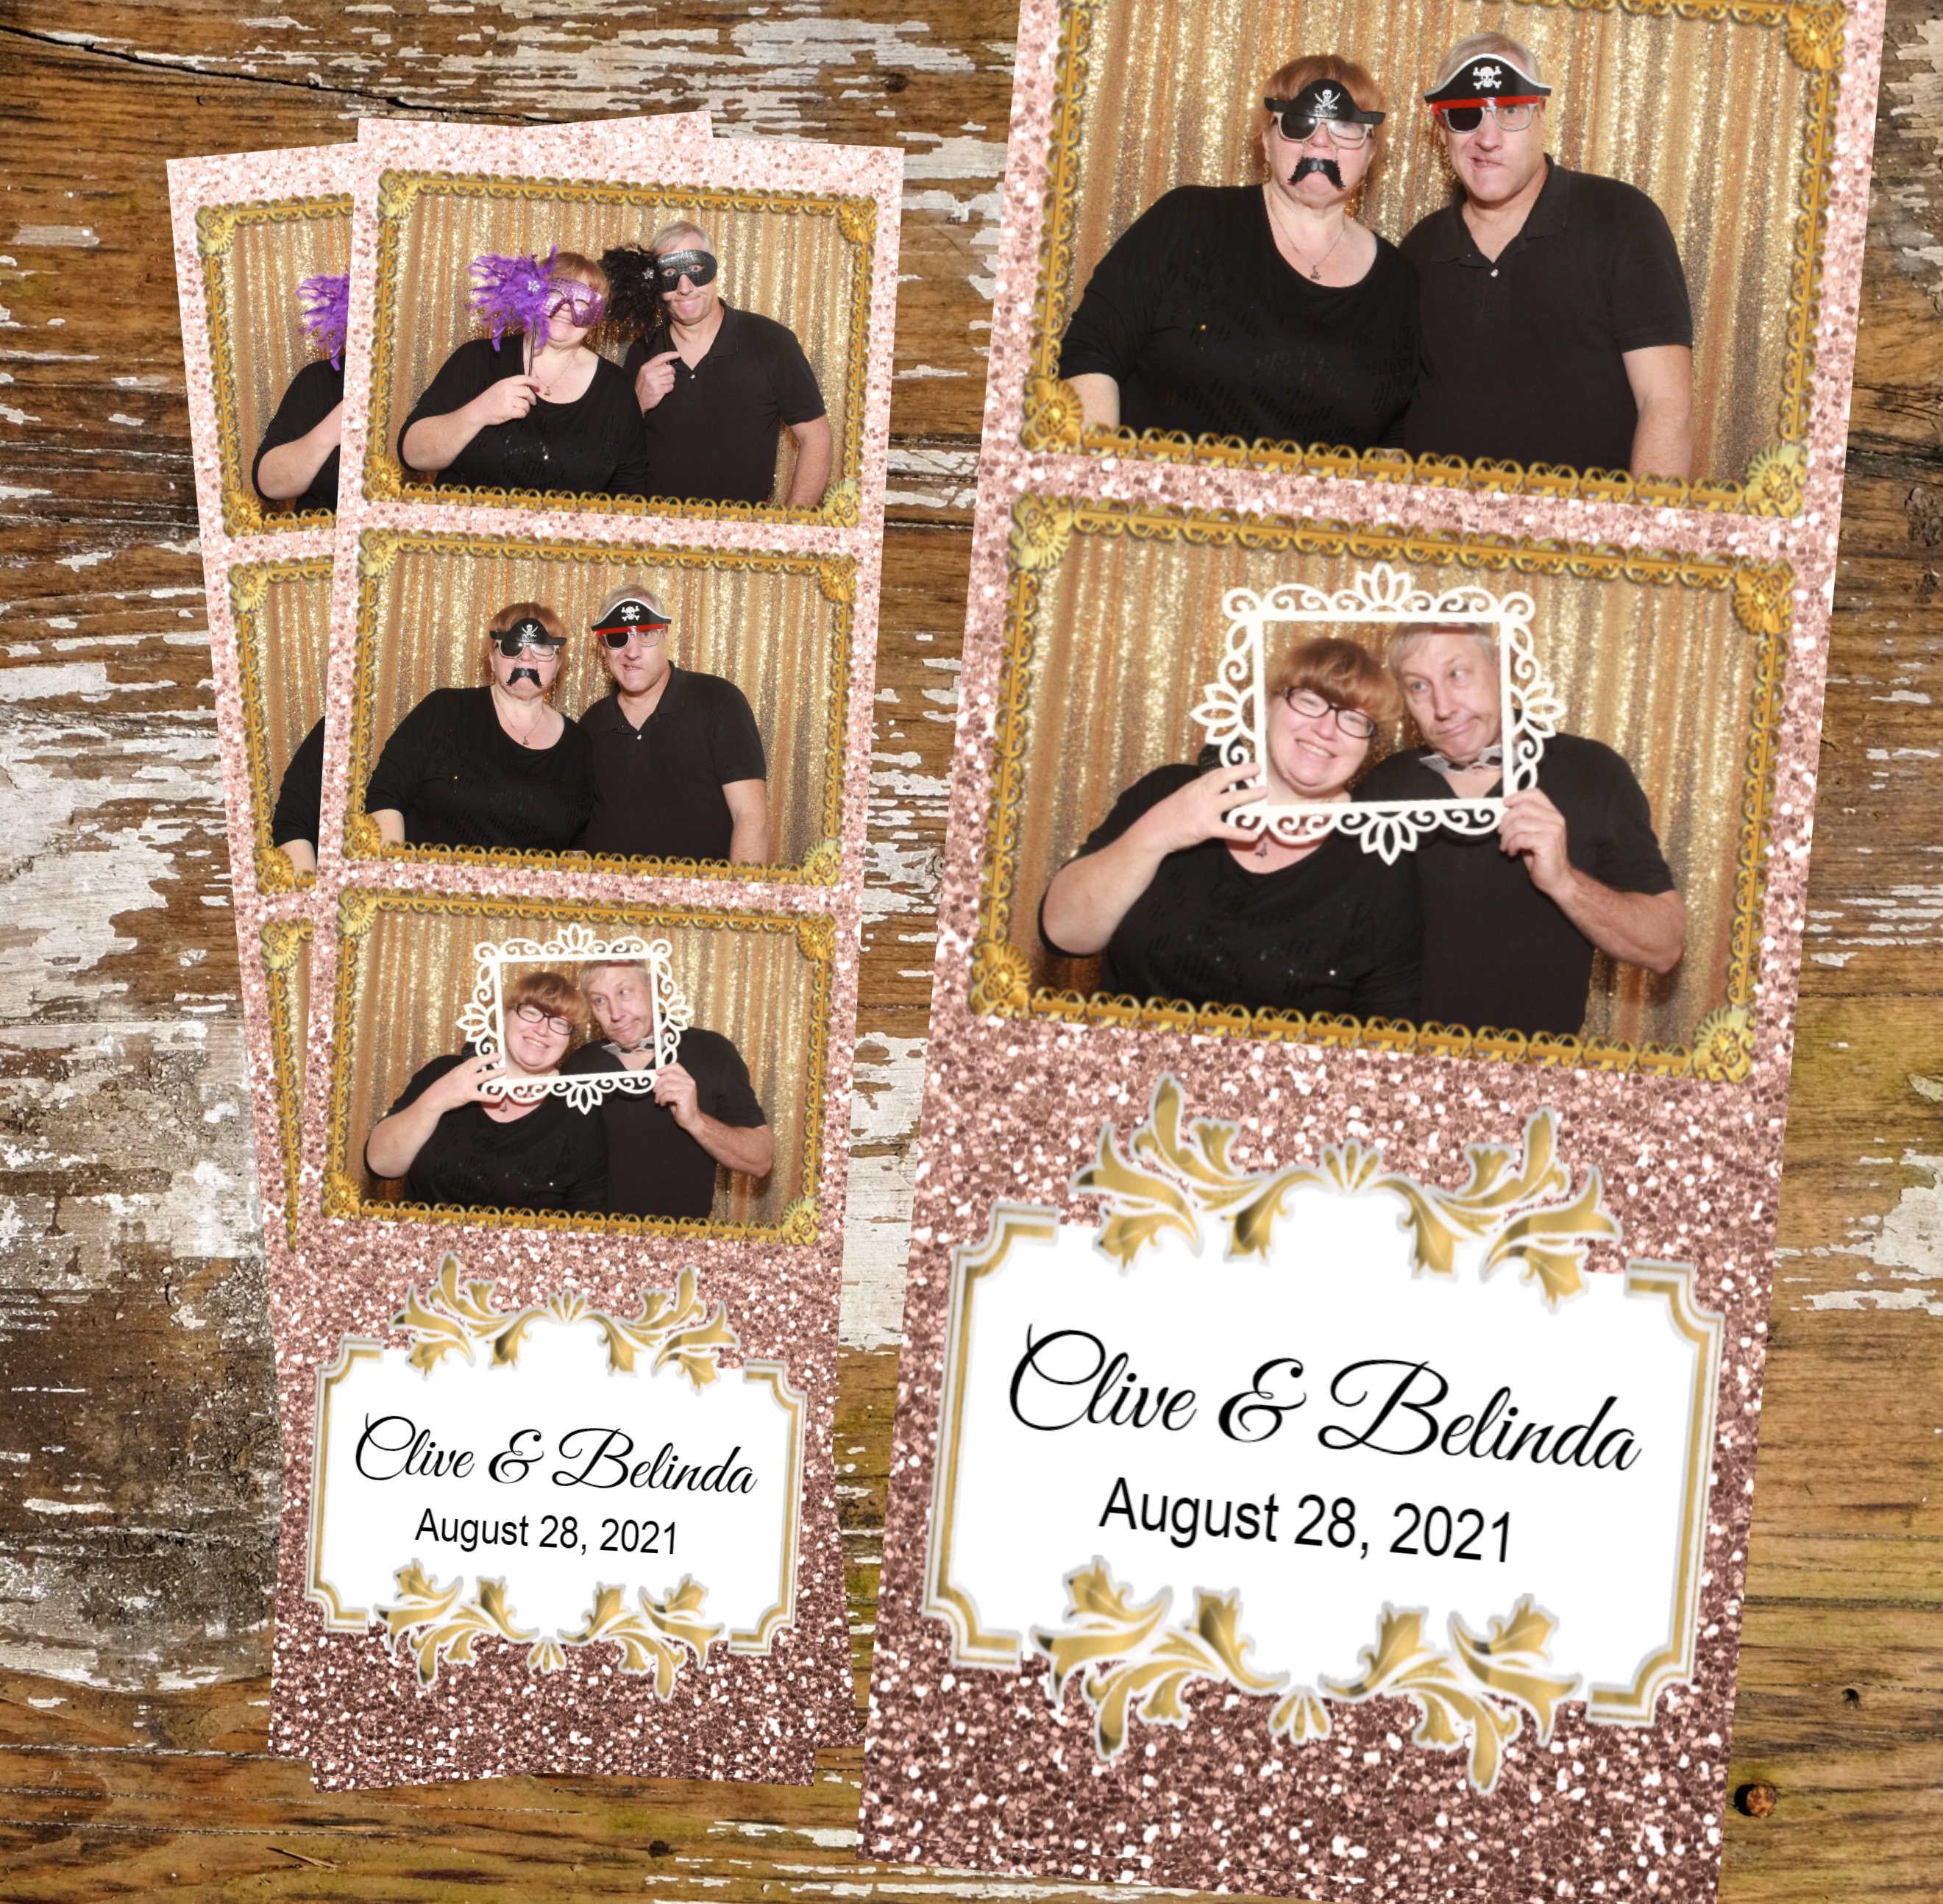 Pink, Rose Gold Glitter Photo Booth Strip 2x6, Gold Frames, Birthday Party,  Wedding, Quinceañera Photobooth 3 up Digital Download Overlay 